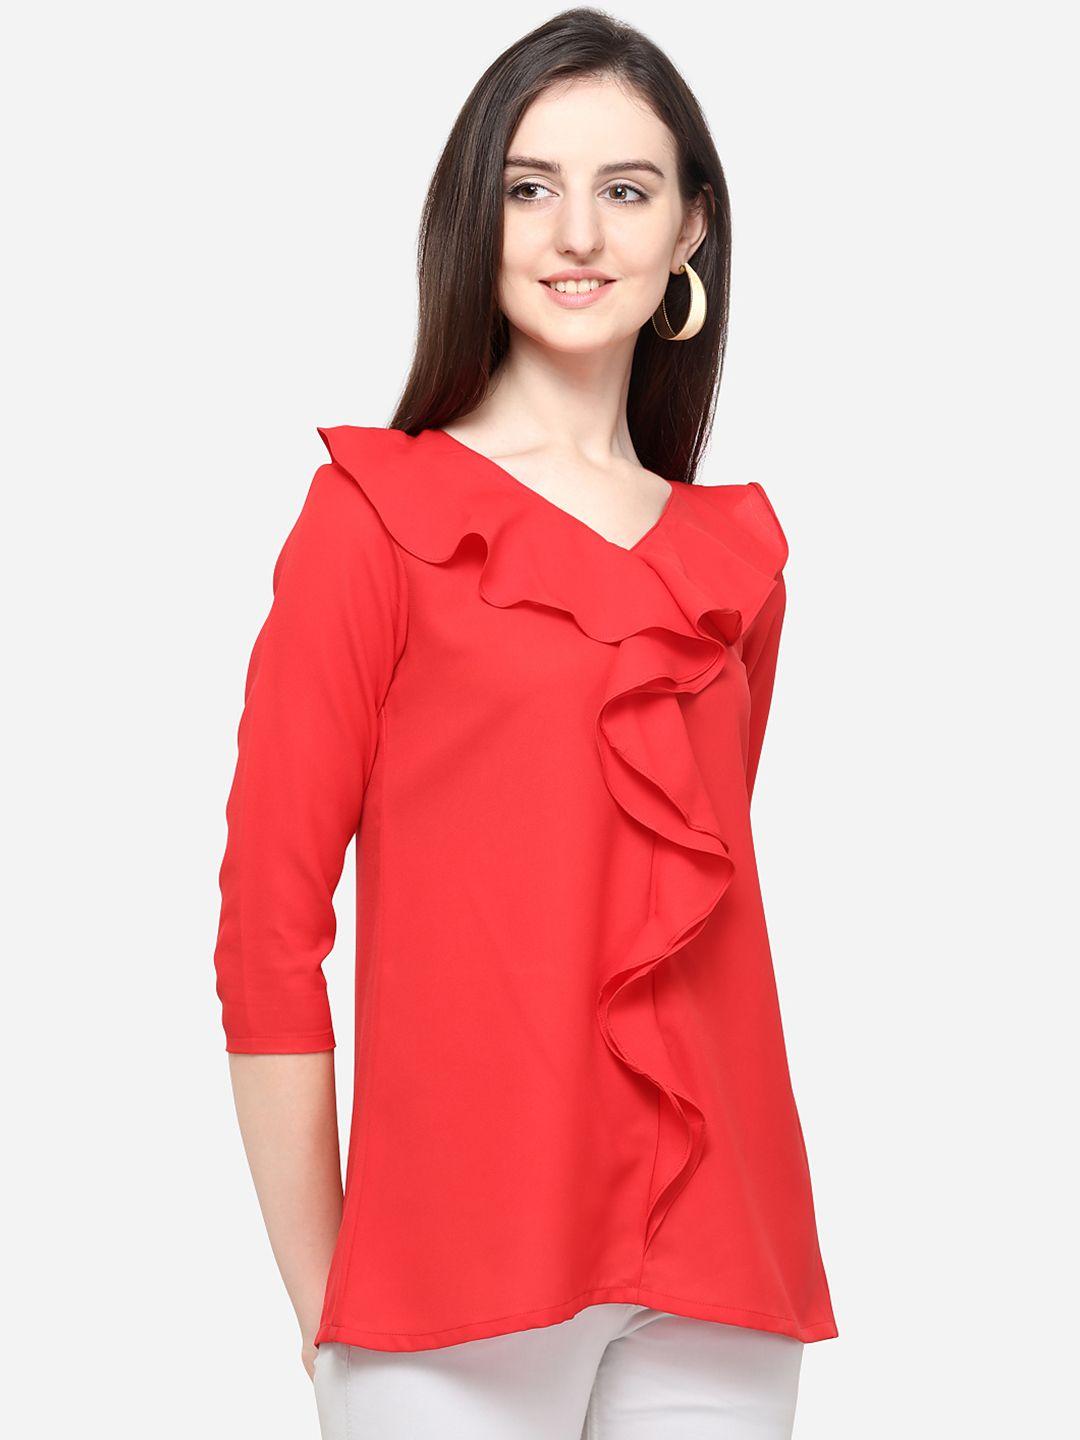 smarty pants women red solid top